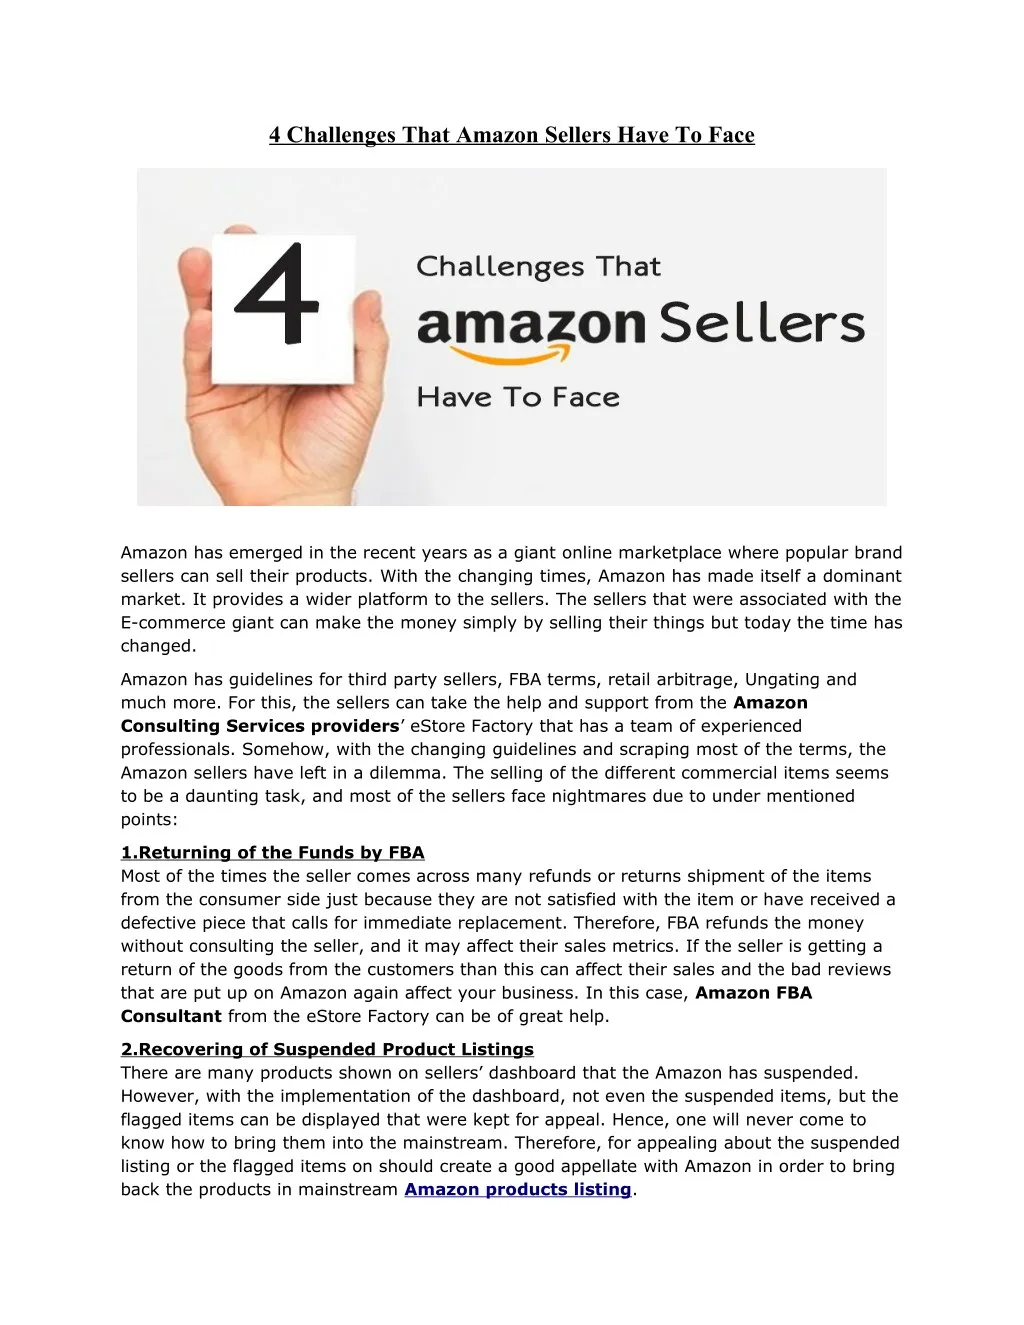 4 challenges that amazon sellers have to face